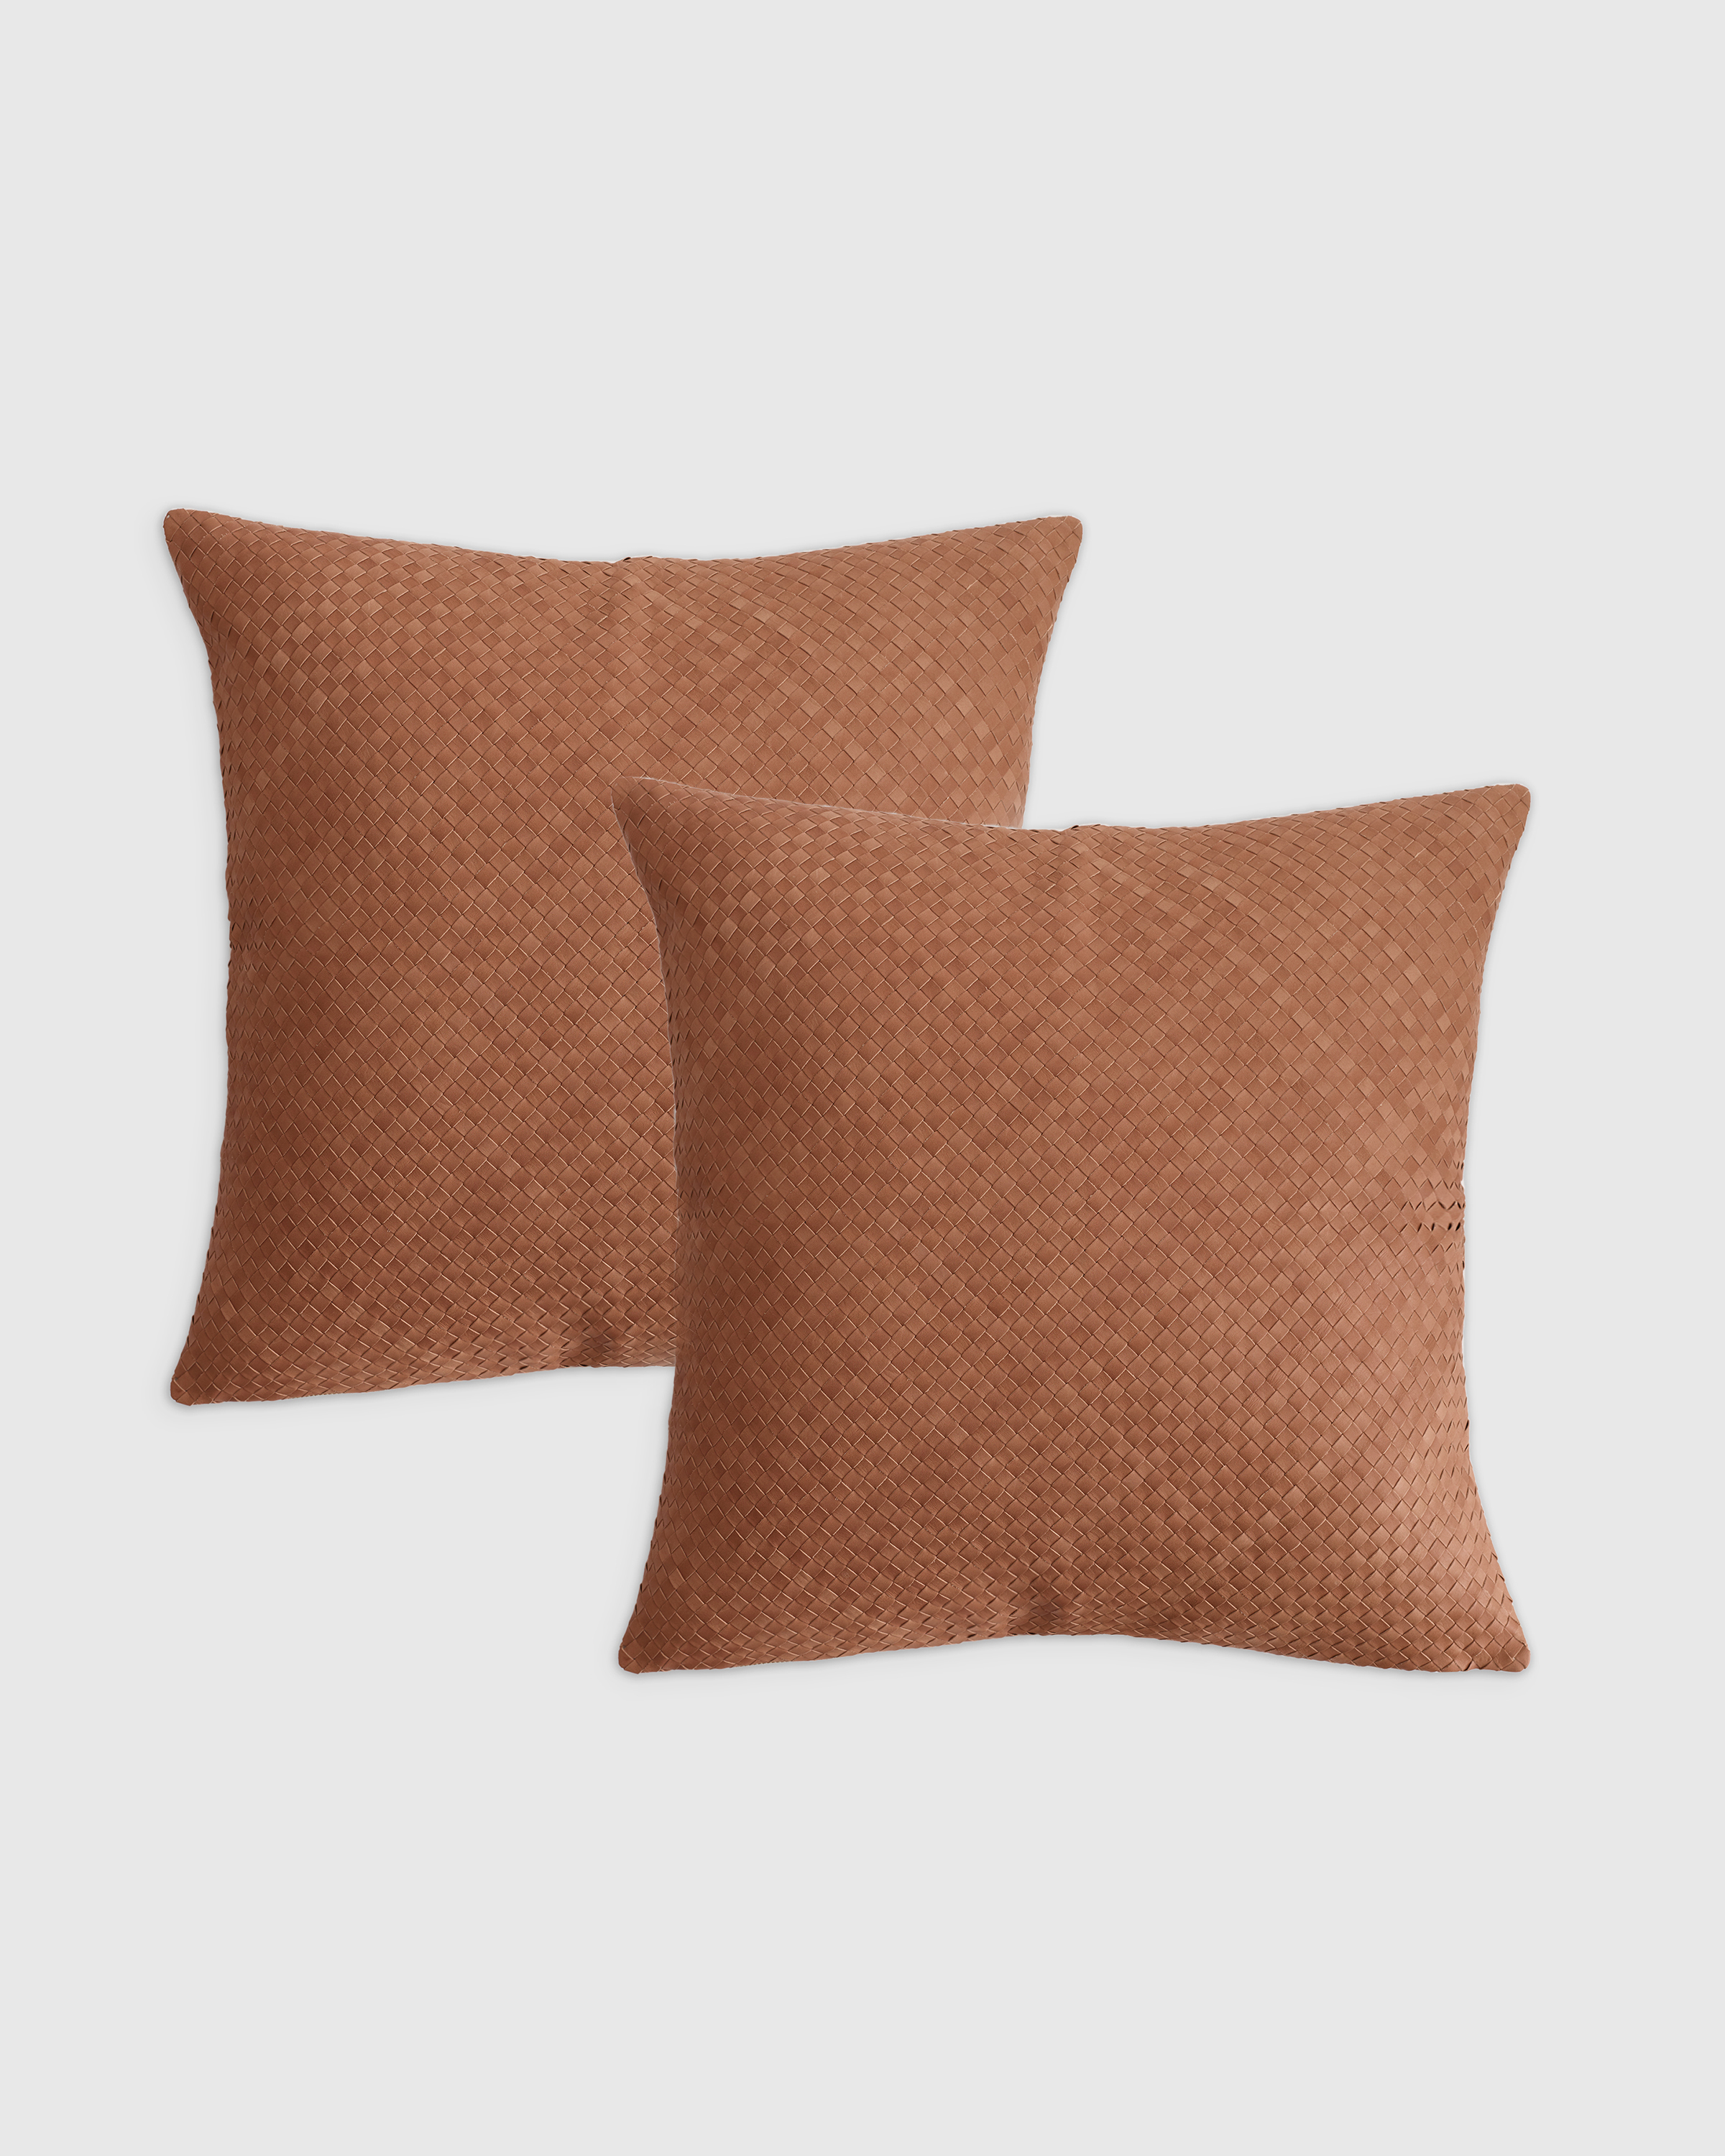 Quince Woven Leather Pillow Cover Set Of 2 In Chestnut